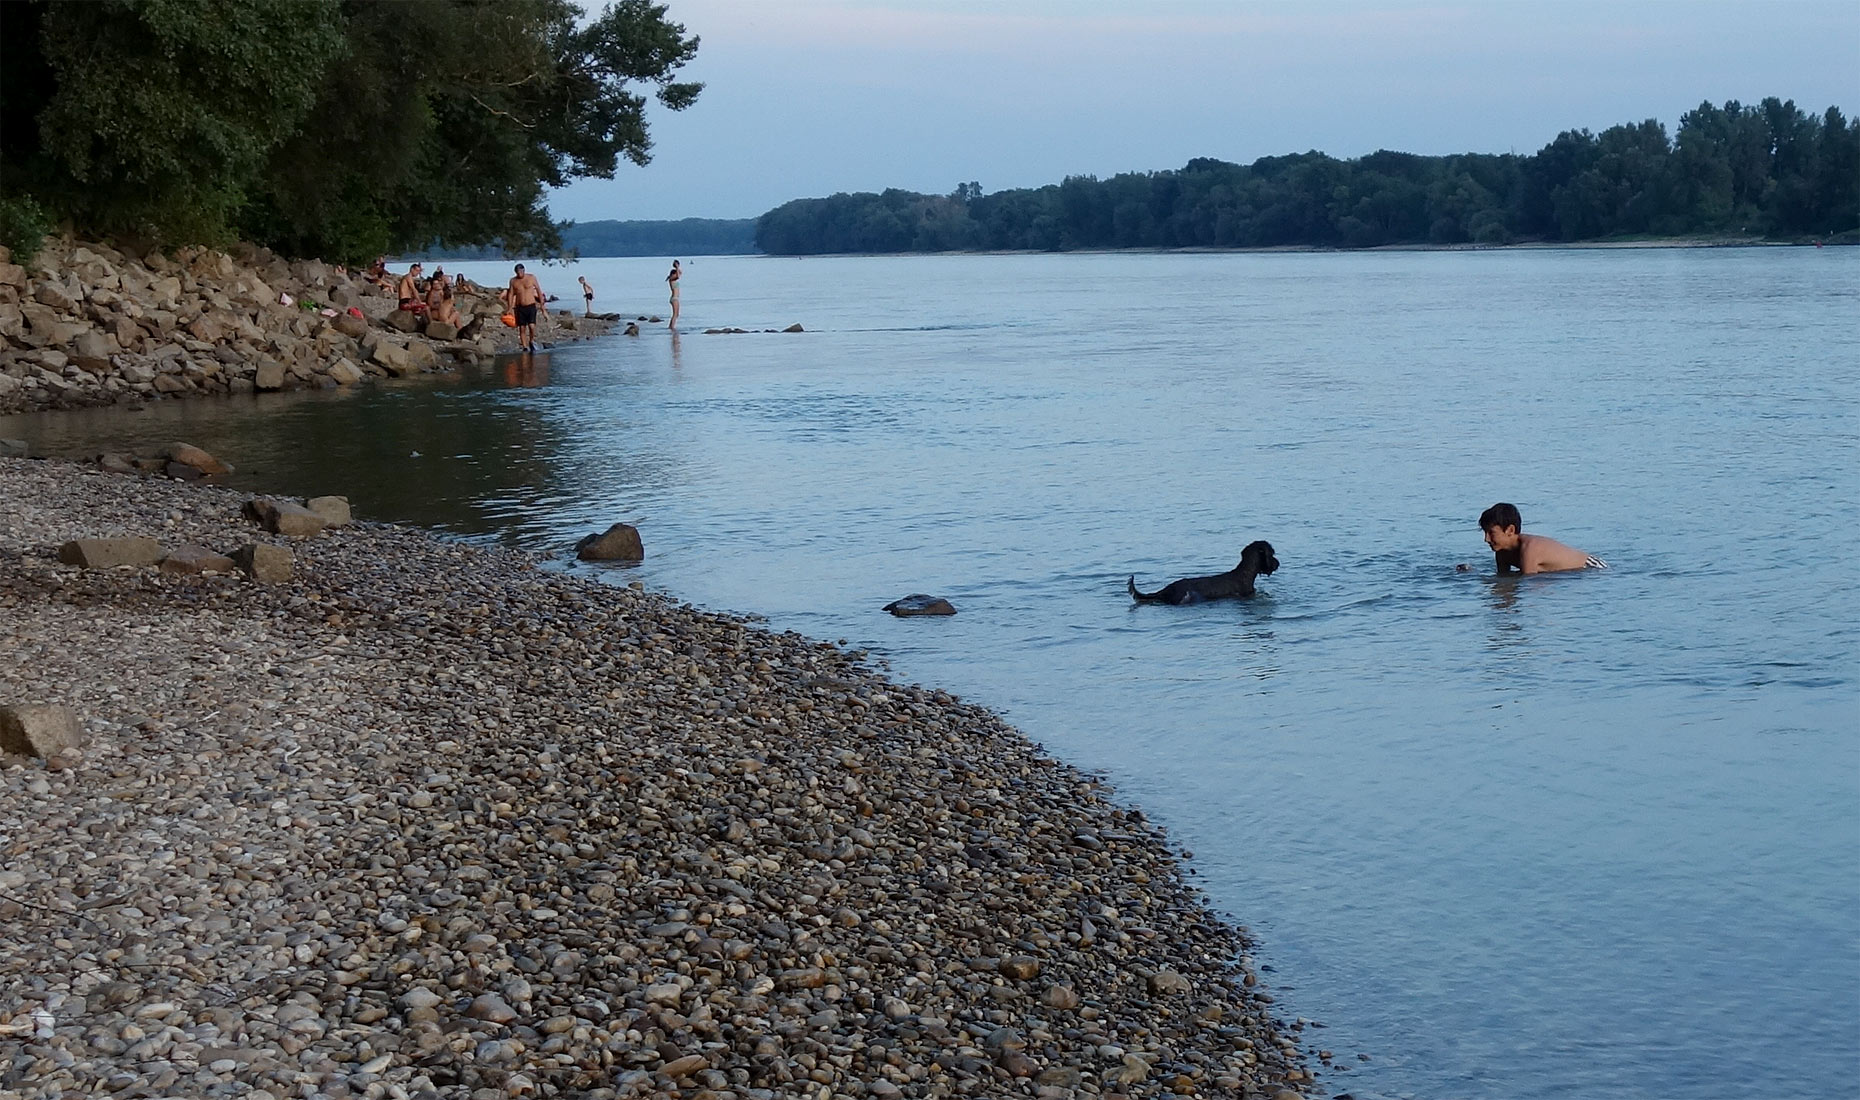 Even dogs like the Danube